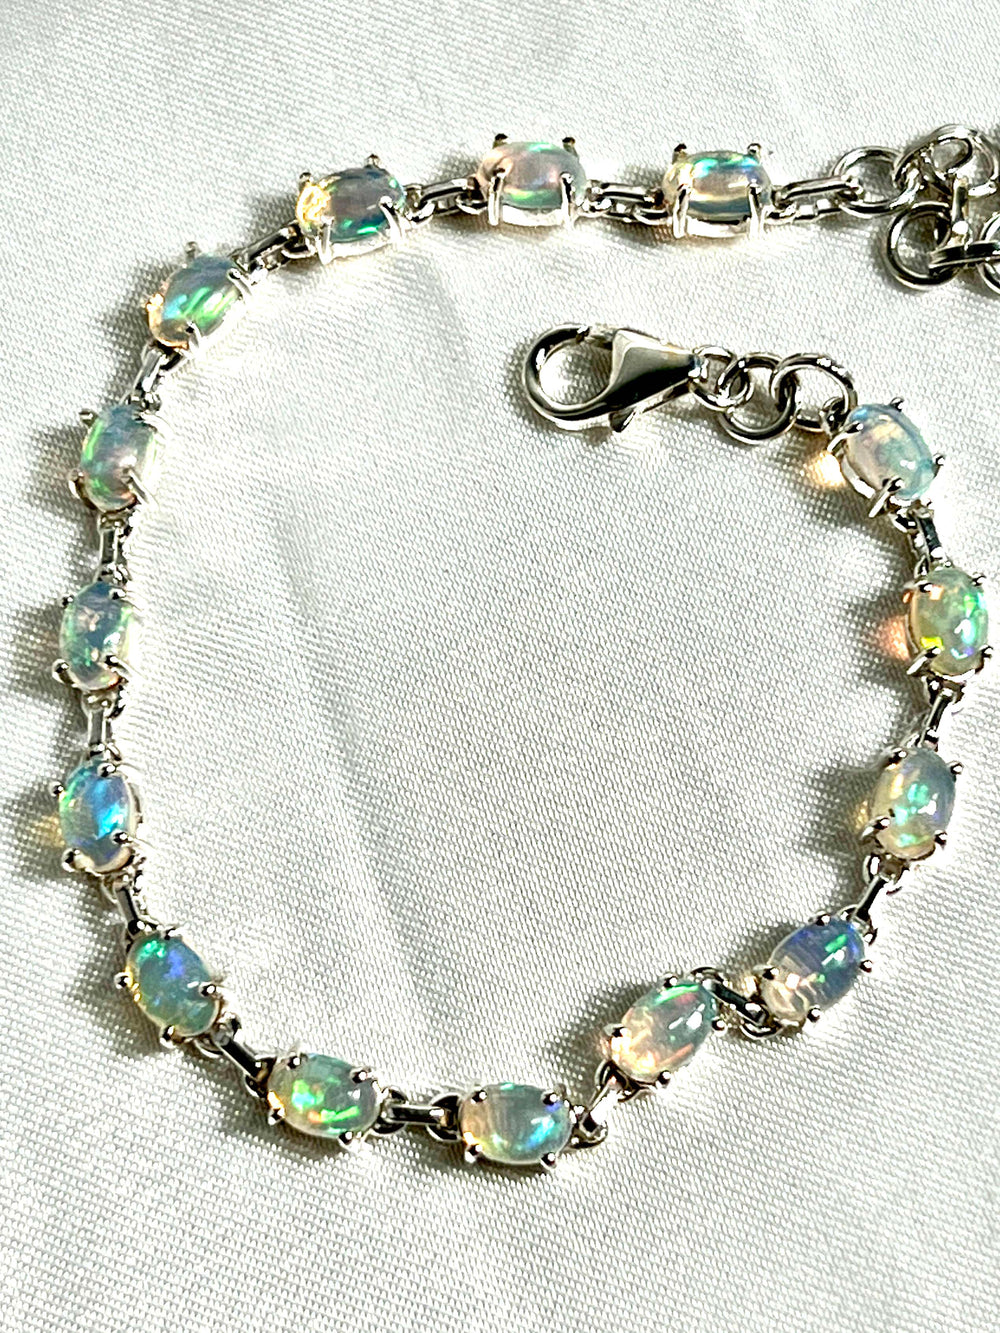 A Super Silver Delicate Ethiopian Opal bracelet exudes glamour as it rests delicately on a pristine white table.